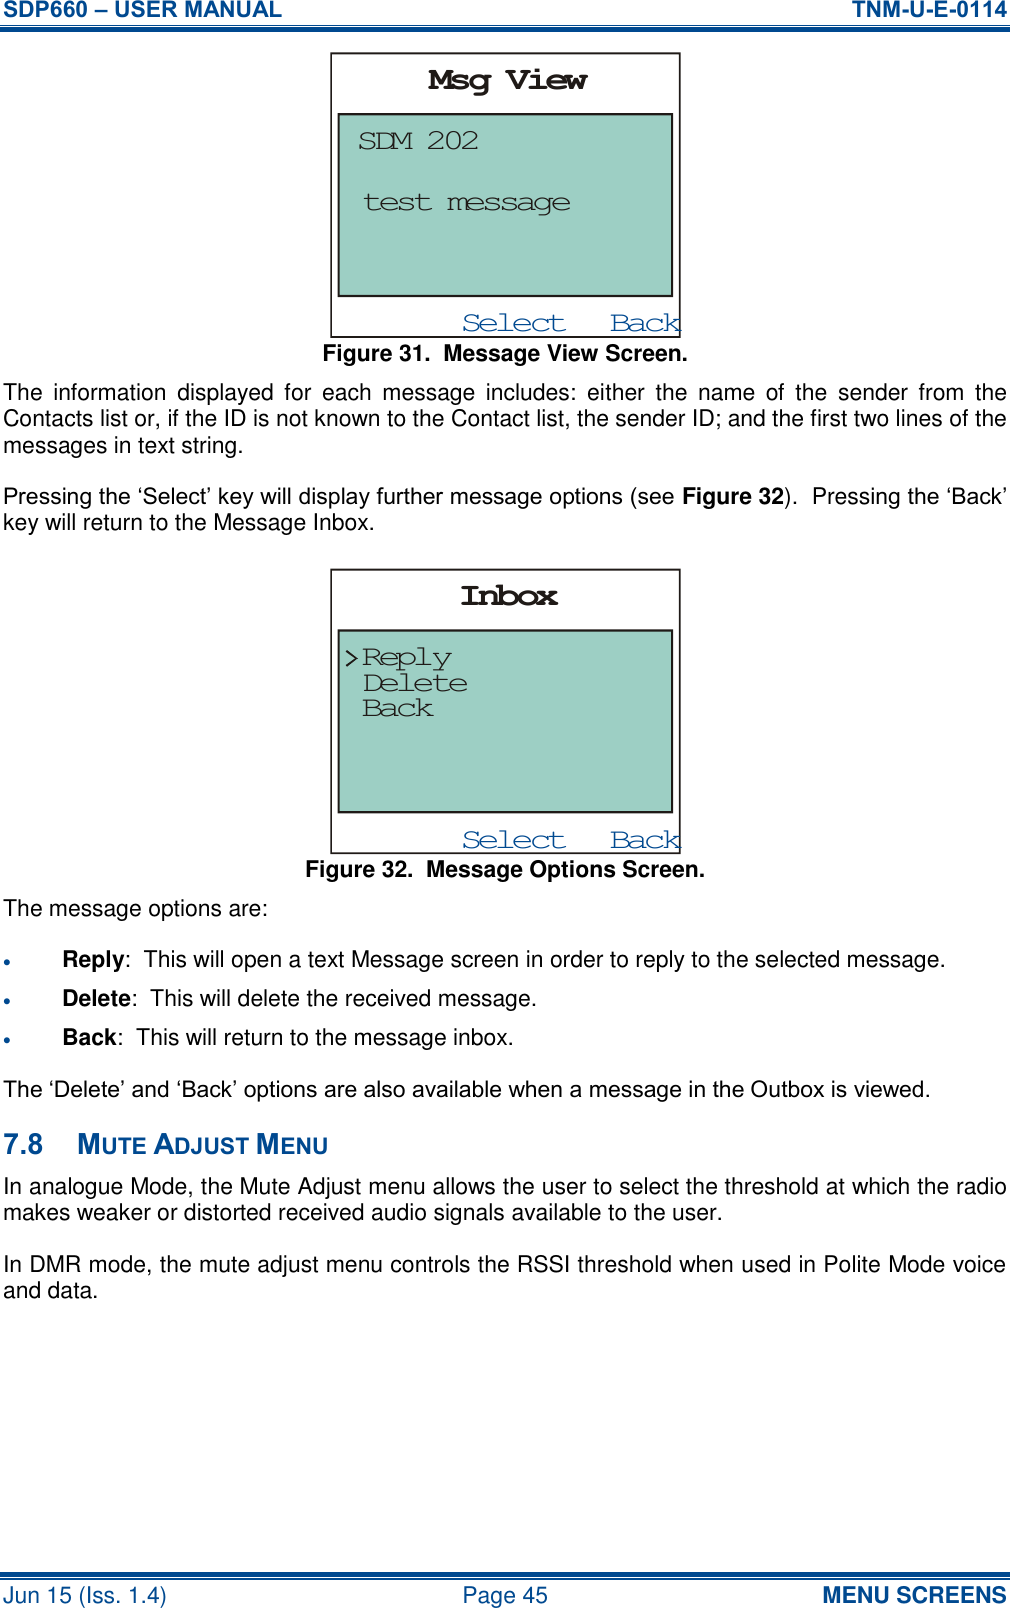 SDP660 – USER MANUAL  TNM-U-E-0114 Jun 15 (Iss. 1.4)  Page 45 MENU SCREENS Figure 31.  Message View Screen. The  information  displayed  for  each  message  includes:  either  the  name  of  the  sender  from  the Contacts list or, if the ID is not known to the Contact list, the sender ID; and the first two lines of the messages in text string. Pressing the ‘Select’ key will display further message options (see Figure 32).  Pressing the ‘Back’ key will return to the Message Inbox. Figure 32.  Message Options Screen. The message options are:  Reply:  This will open a text Message screen in order to reply to the selected message.  Delete:  This will delete the received message.  Back:  This will return to the message inbox. The ‘Delete’ and ‘Back’ options are also available when a message in the Outbox is viewed. 7.8 MUTE ADJUST MENU In analogue Mode, the Mute Adjust menu allows the user to select the threshold at which the radio makes weaker or distorted received audio signals available to the user. In DMR mode, the mute adjust menu controls the RSSI threshold when used in Polite Mode voice and data. BackSelectMsg ViewSDM 202test messageBackSelectInboxBackReplyDelete